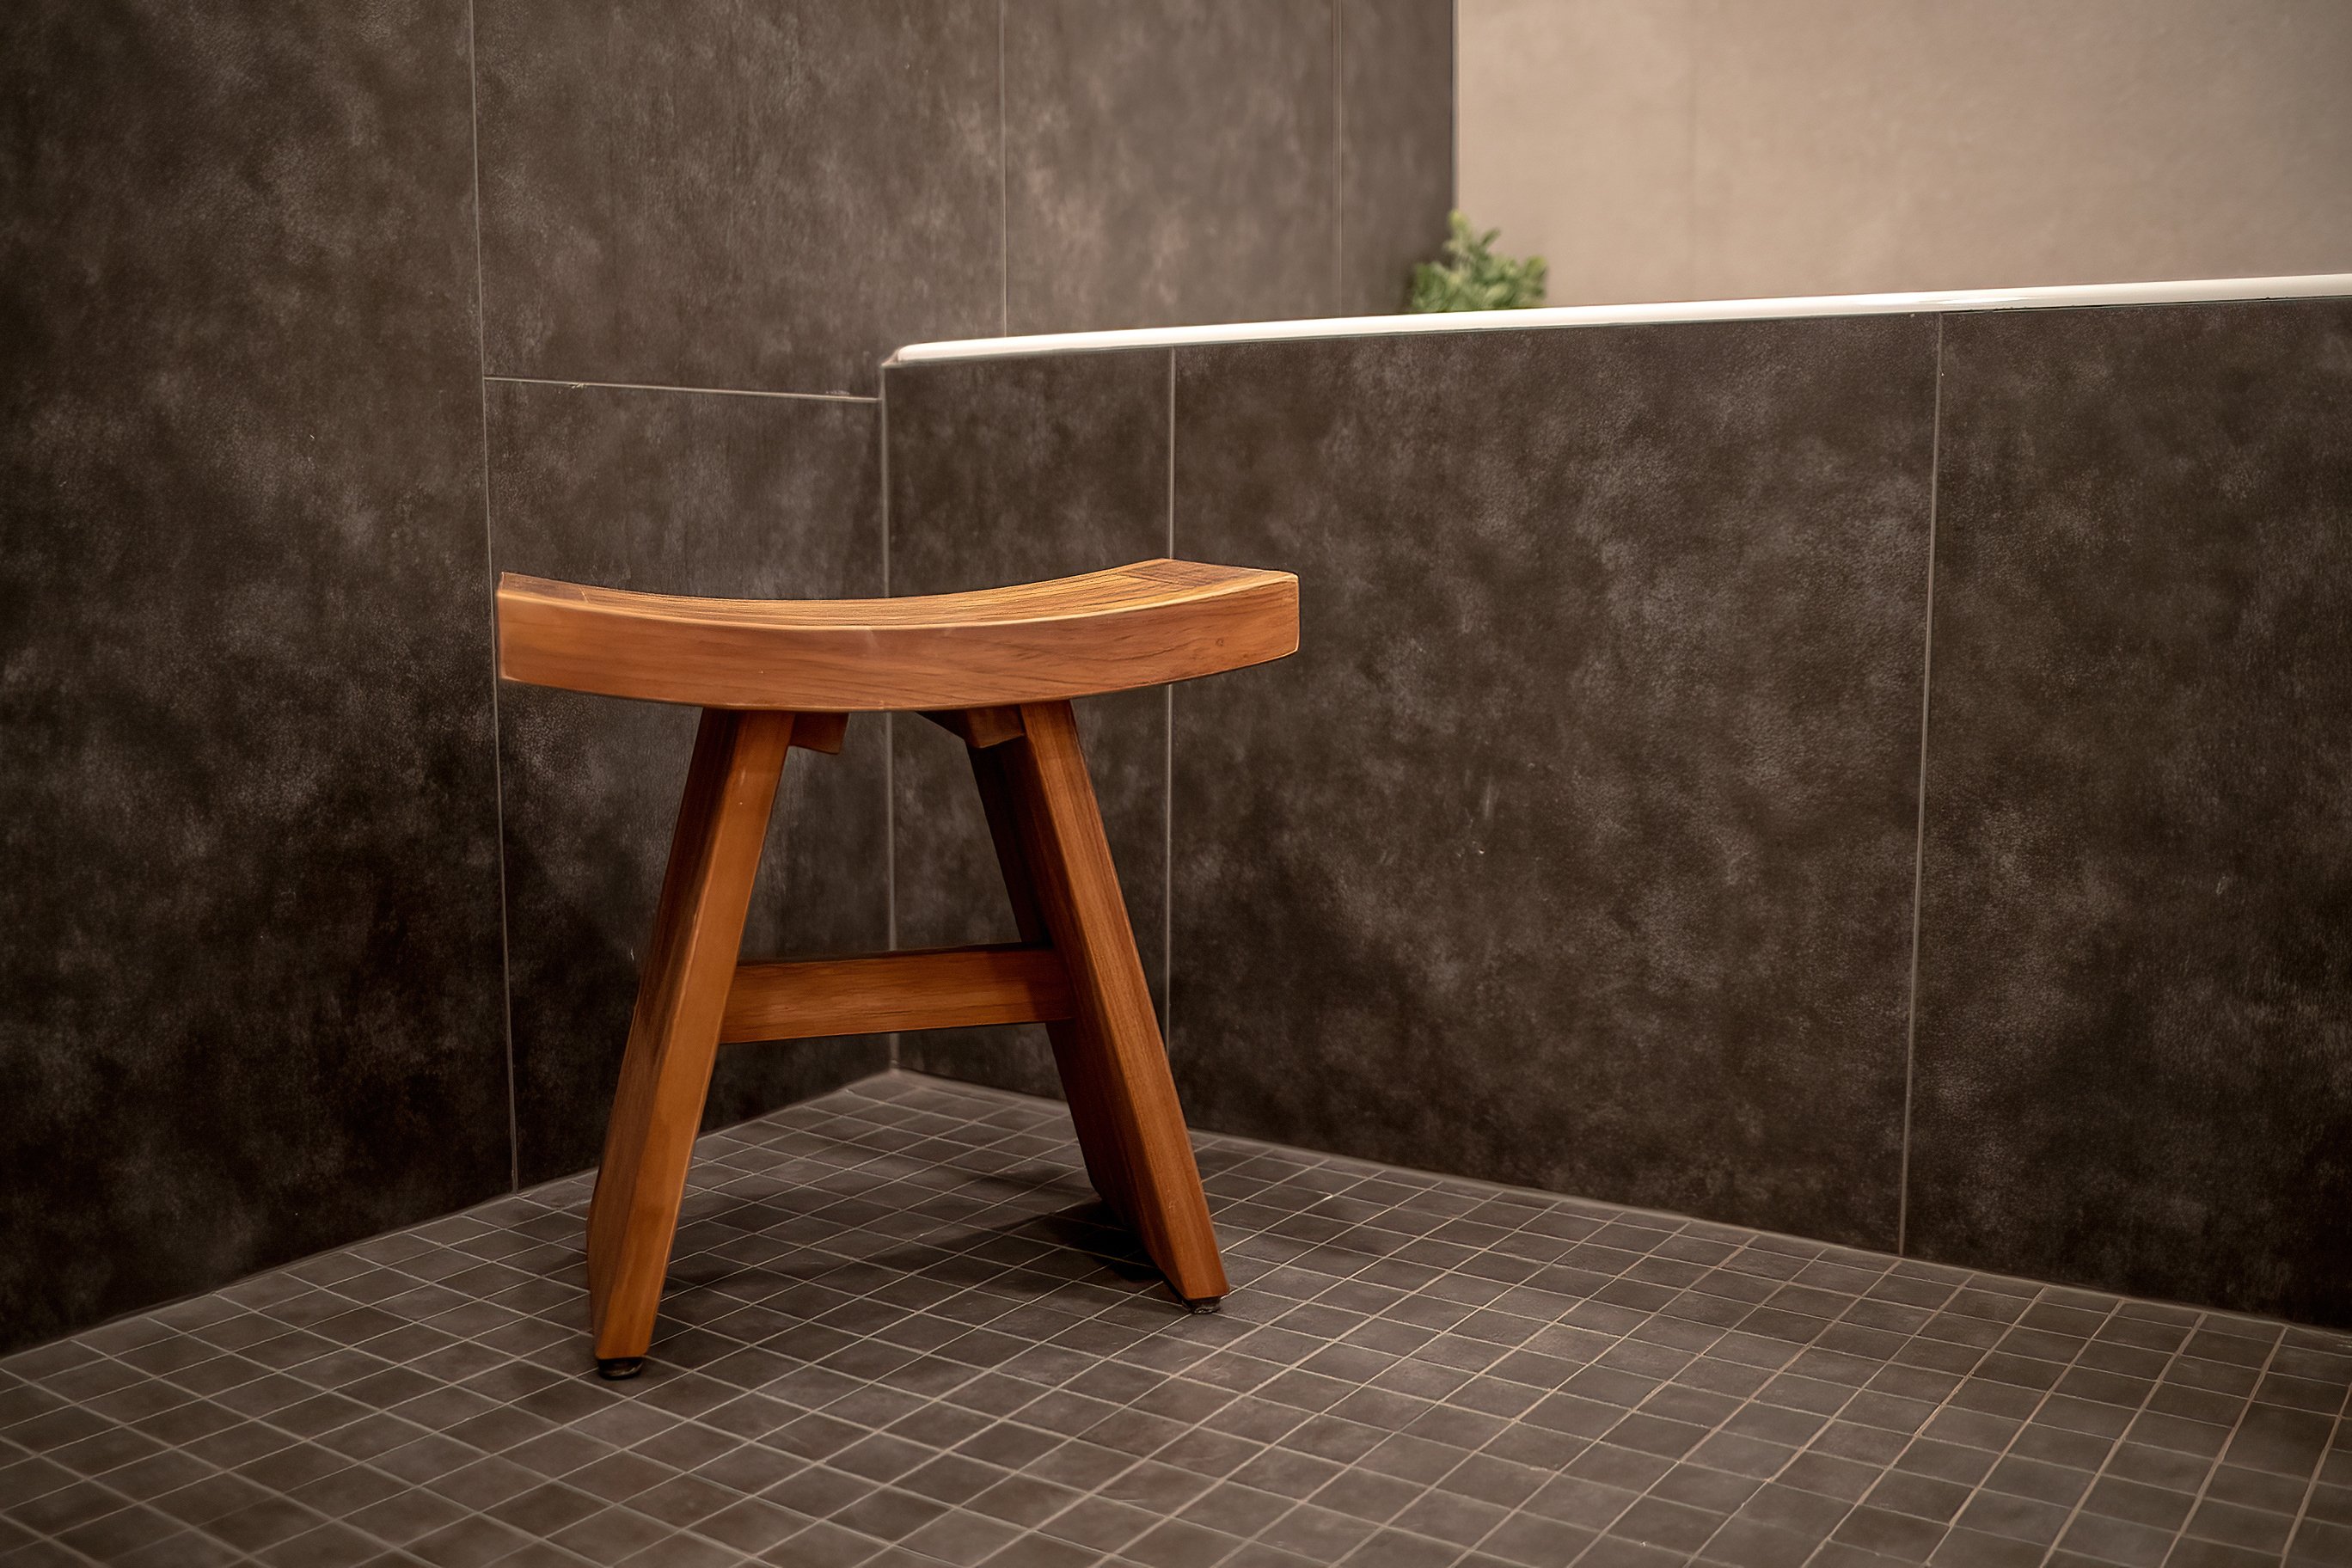 A luxury bathroom remodel with multiple types of tile and a small wooden stool in the foreground